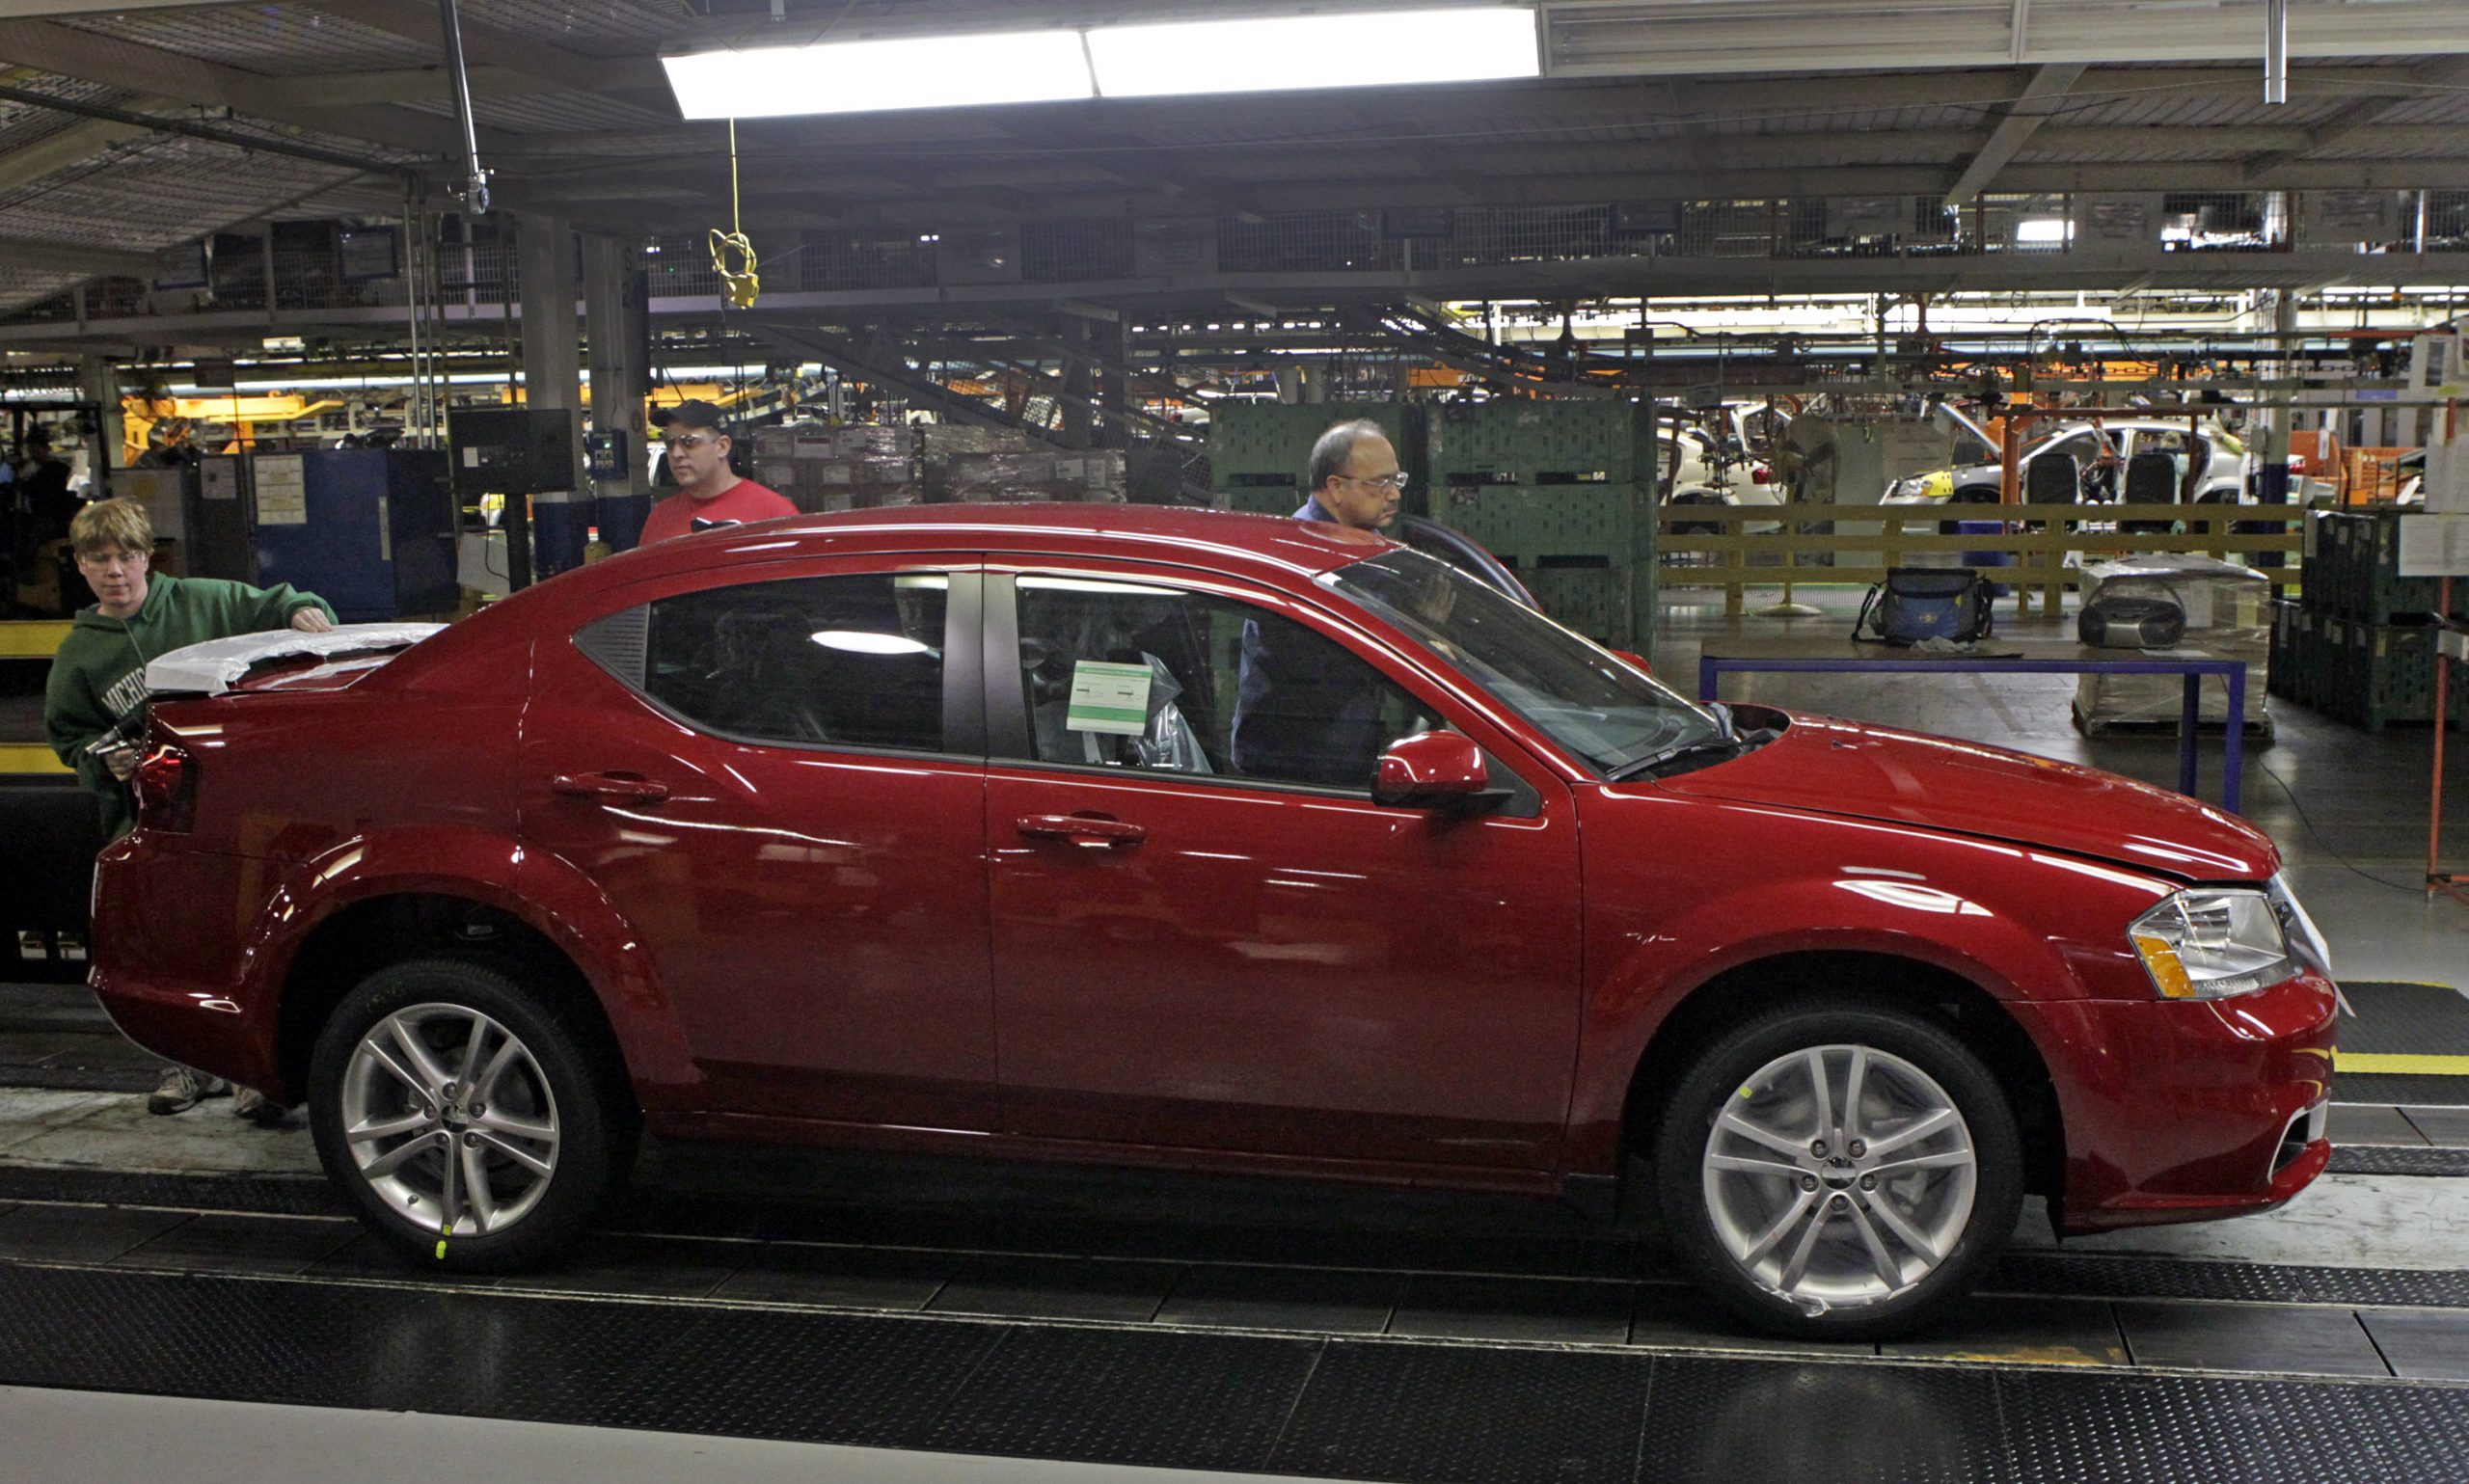 Workers inspect the 2011 Dodge Avenger at Chrysler Group's production plant in Sterling Heights, Michigan